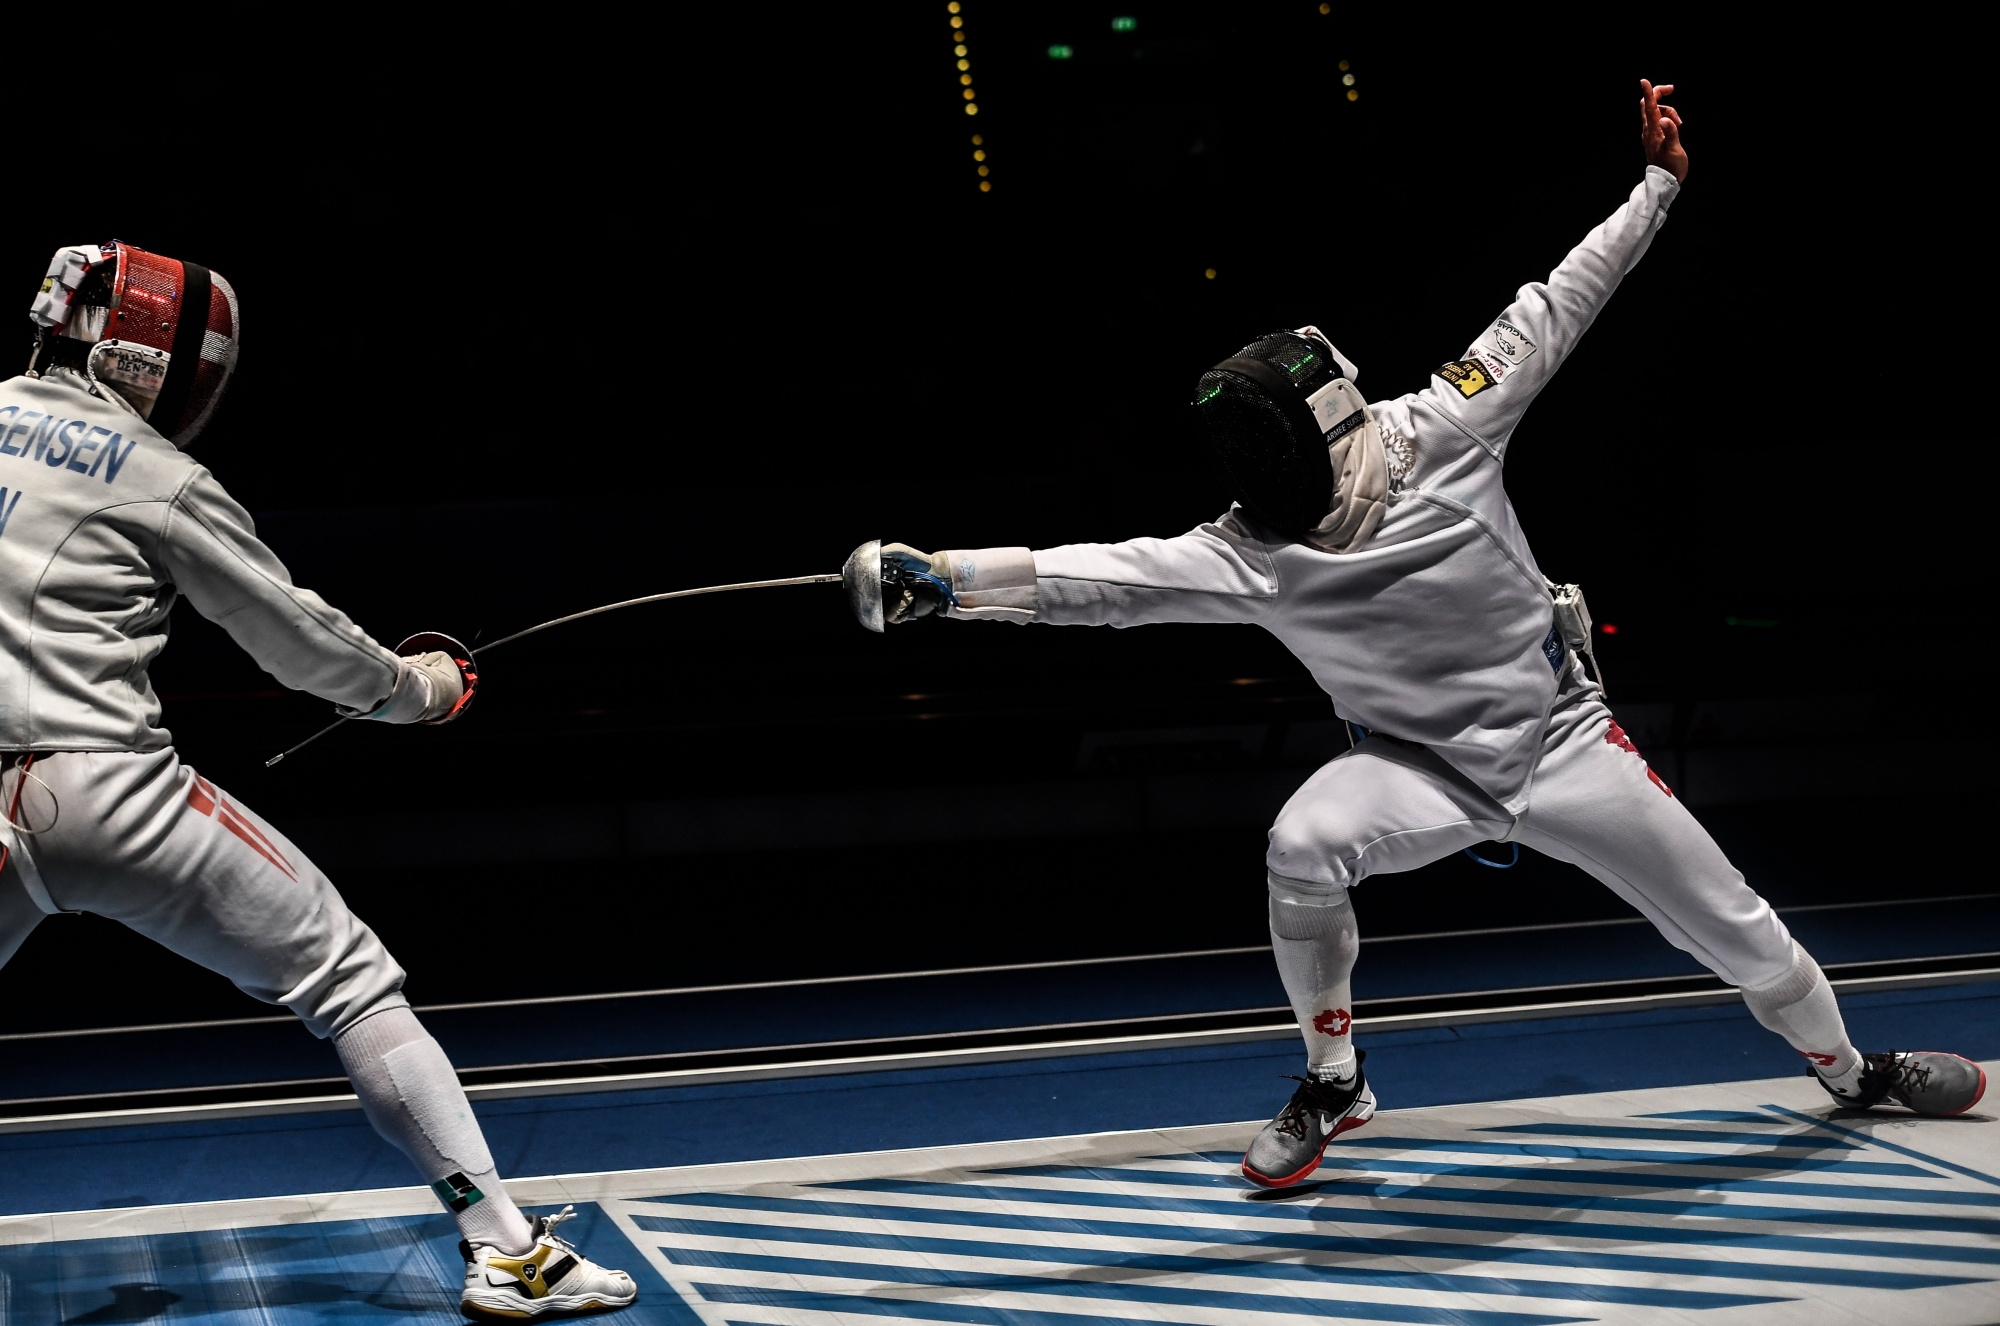 epa06103193 Switzerland's Max Heinzer (R) competes against Patrick Jorgensen of Denmark in a men's Epee qualifying bout at the Fencing World Championships in Leipzig, Germany, 22 July 2017.  EPA/FILIP SINGER GERMANY FENCING WORLD CHAMPIONSHIPS 2017